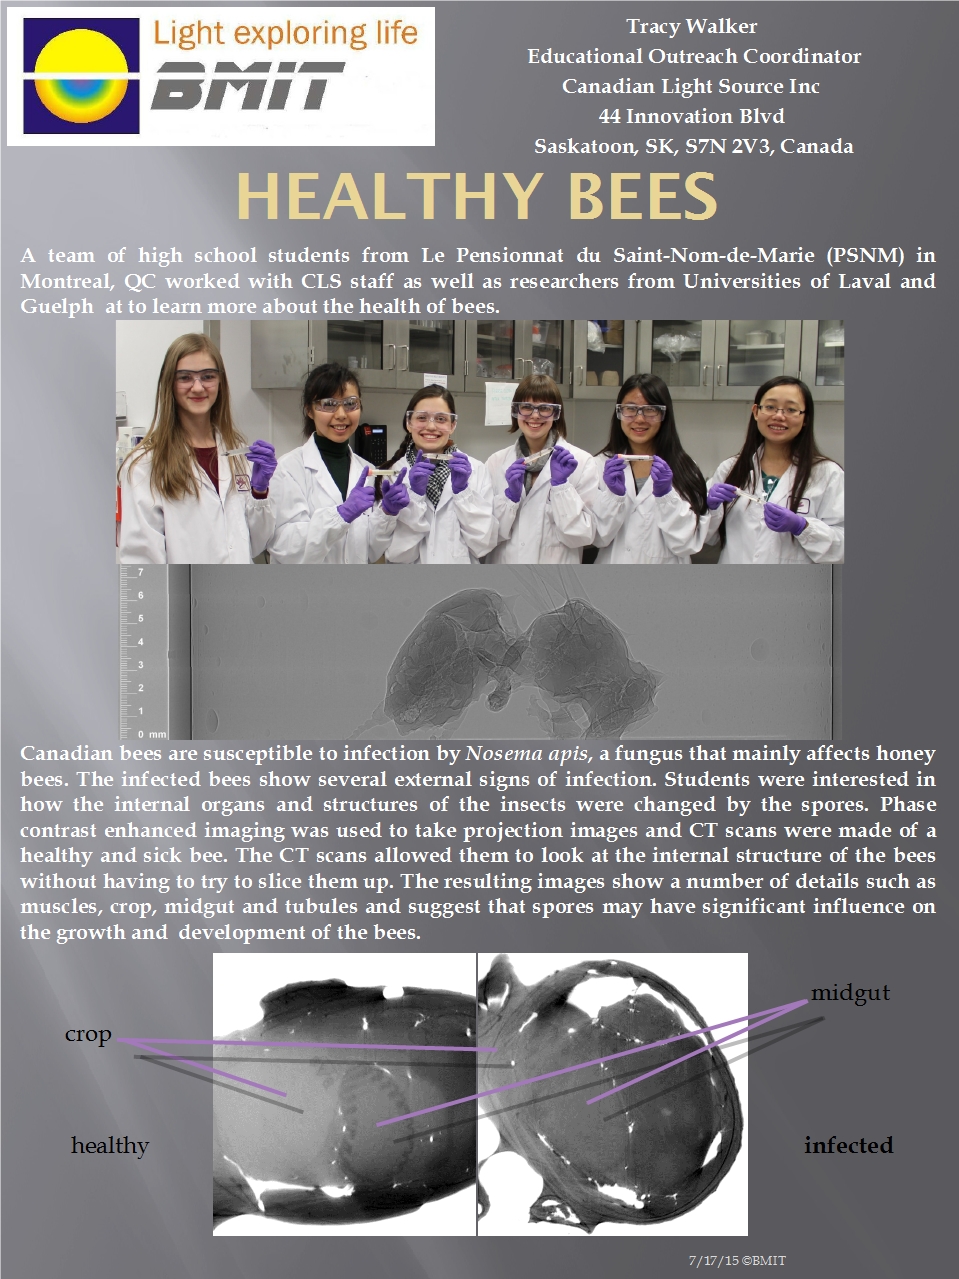 Healthy Bees Image